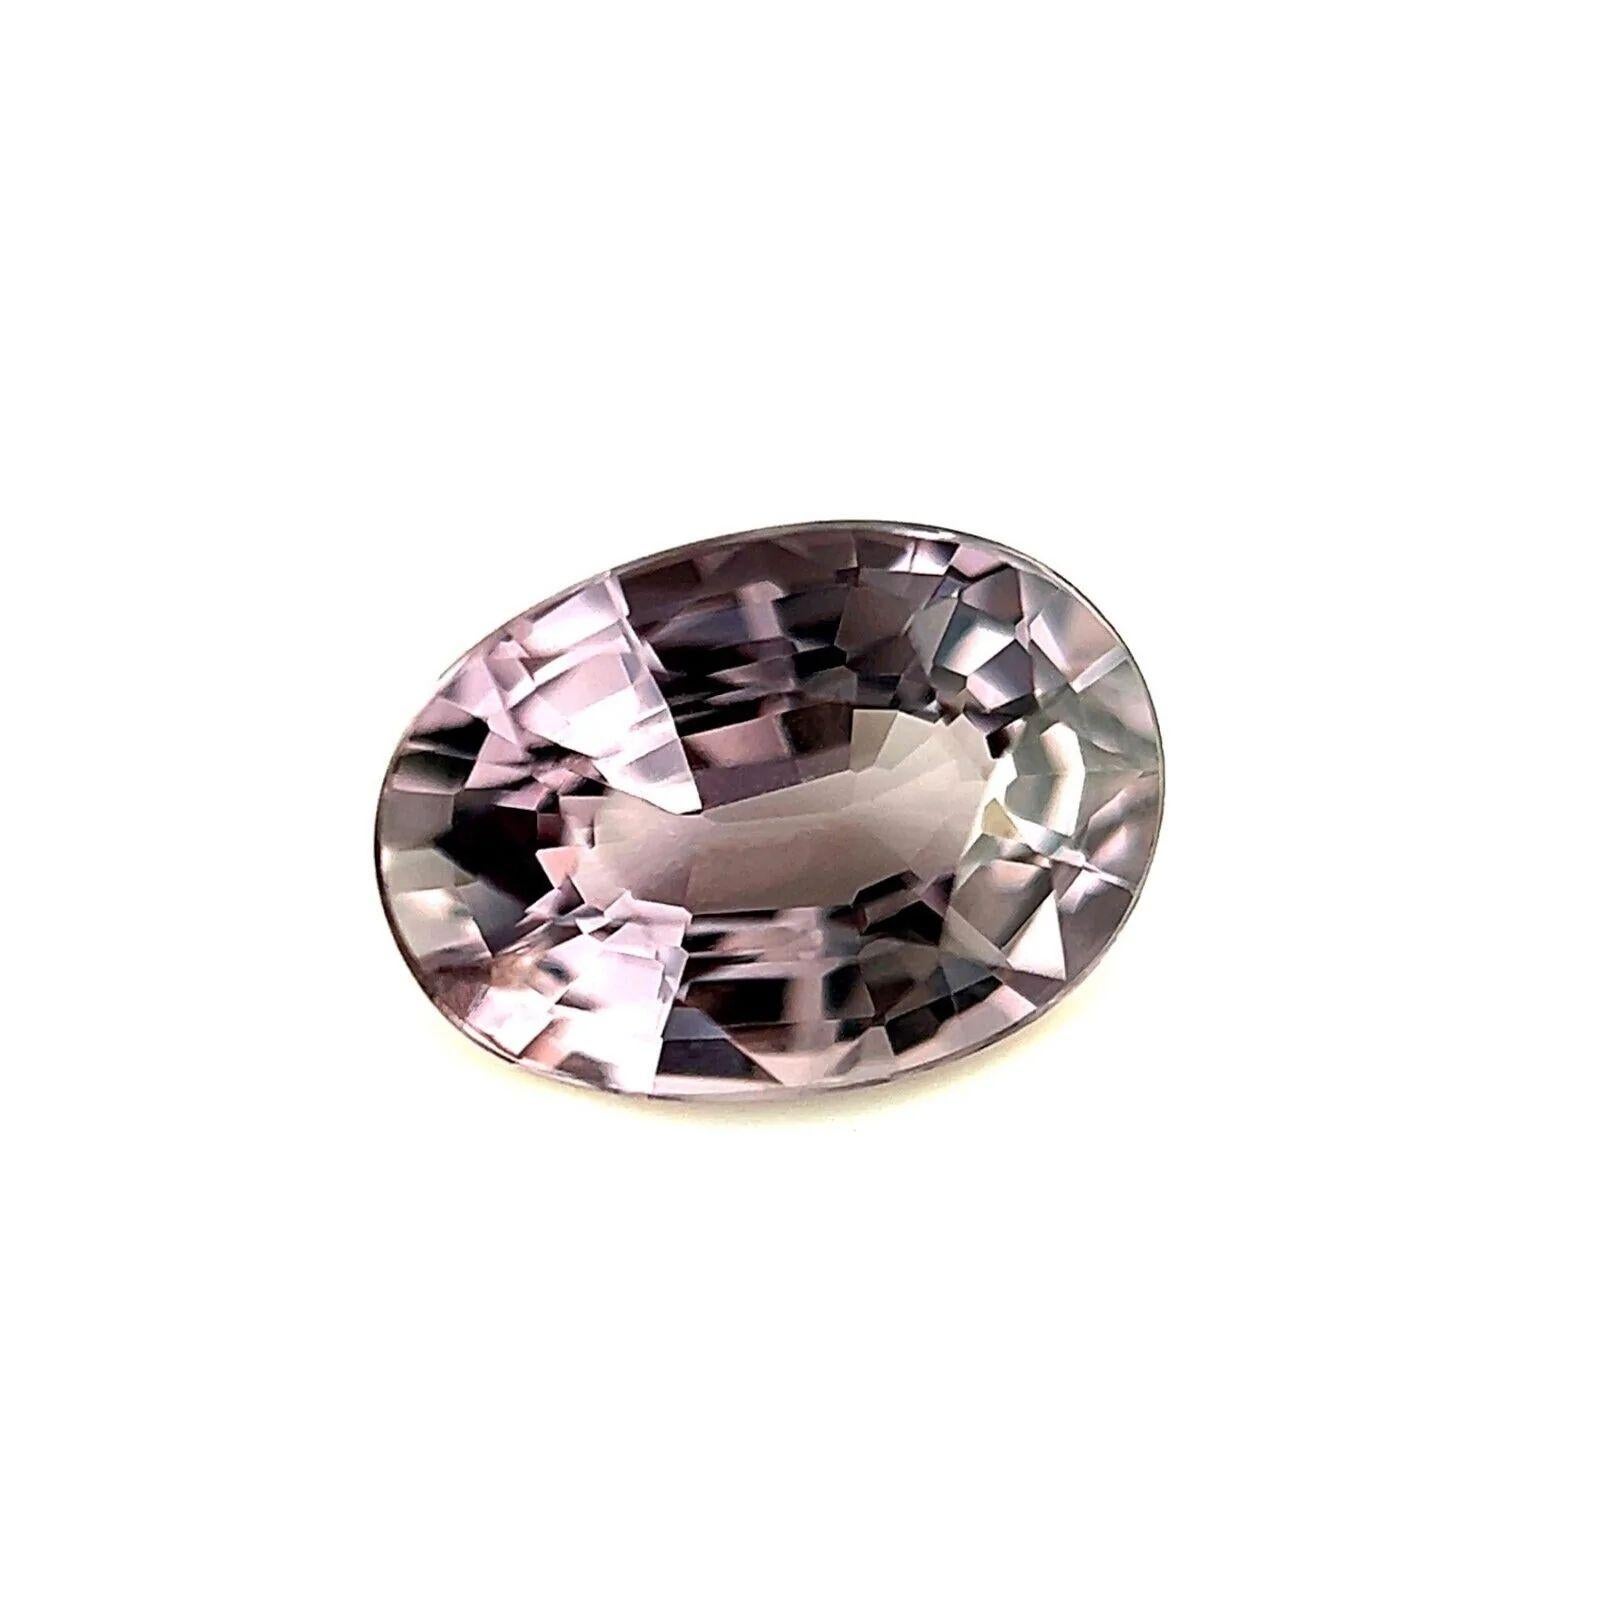 1.48ct Titanium Purple Natural Spinel Oval Cut 8.2x5.8mm Loose Rare Gem

Natural Purple ‘Titanium’ Spinel Gemstone.
Beautiful 1.48 Carat spinel with a grey purple colour, referred to as ‘titanium’ in the trade. This spinel also has very good